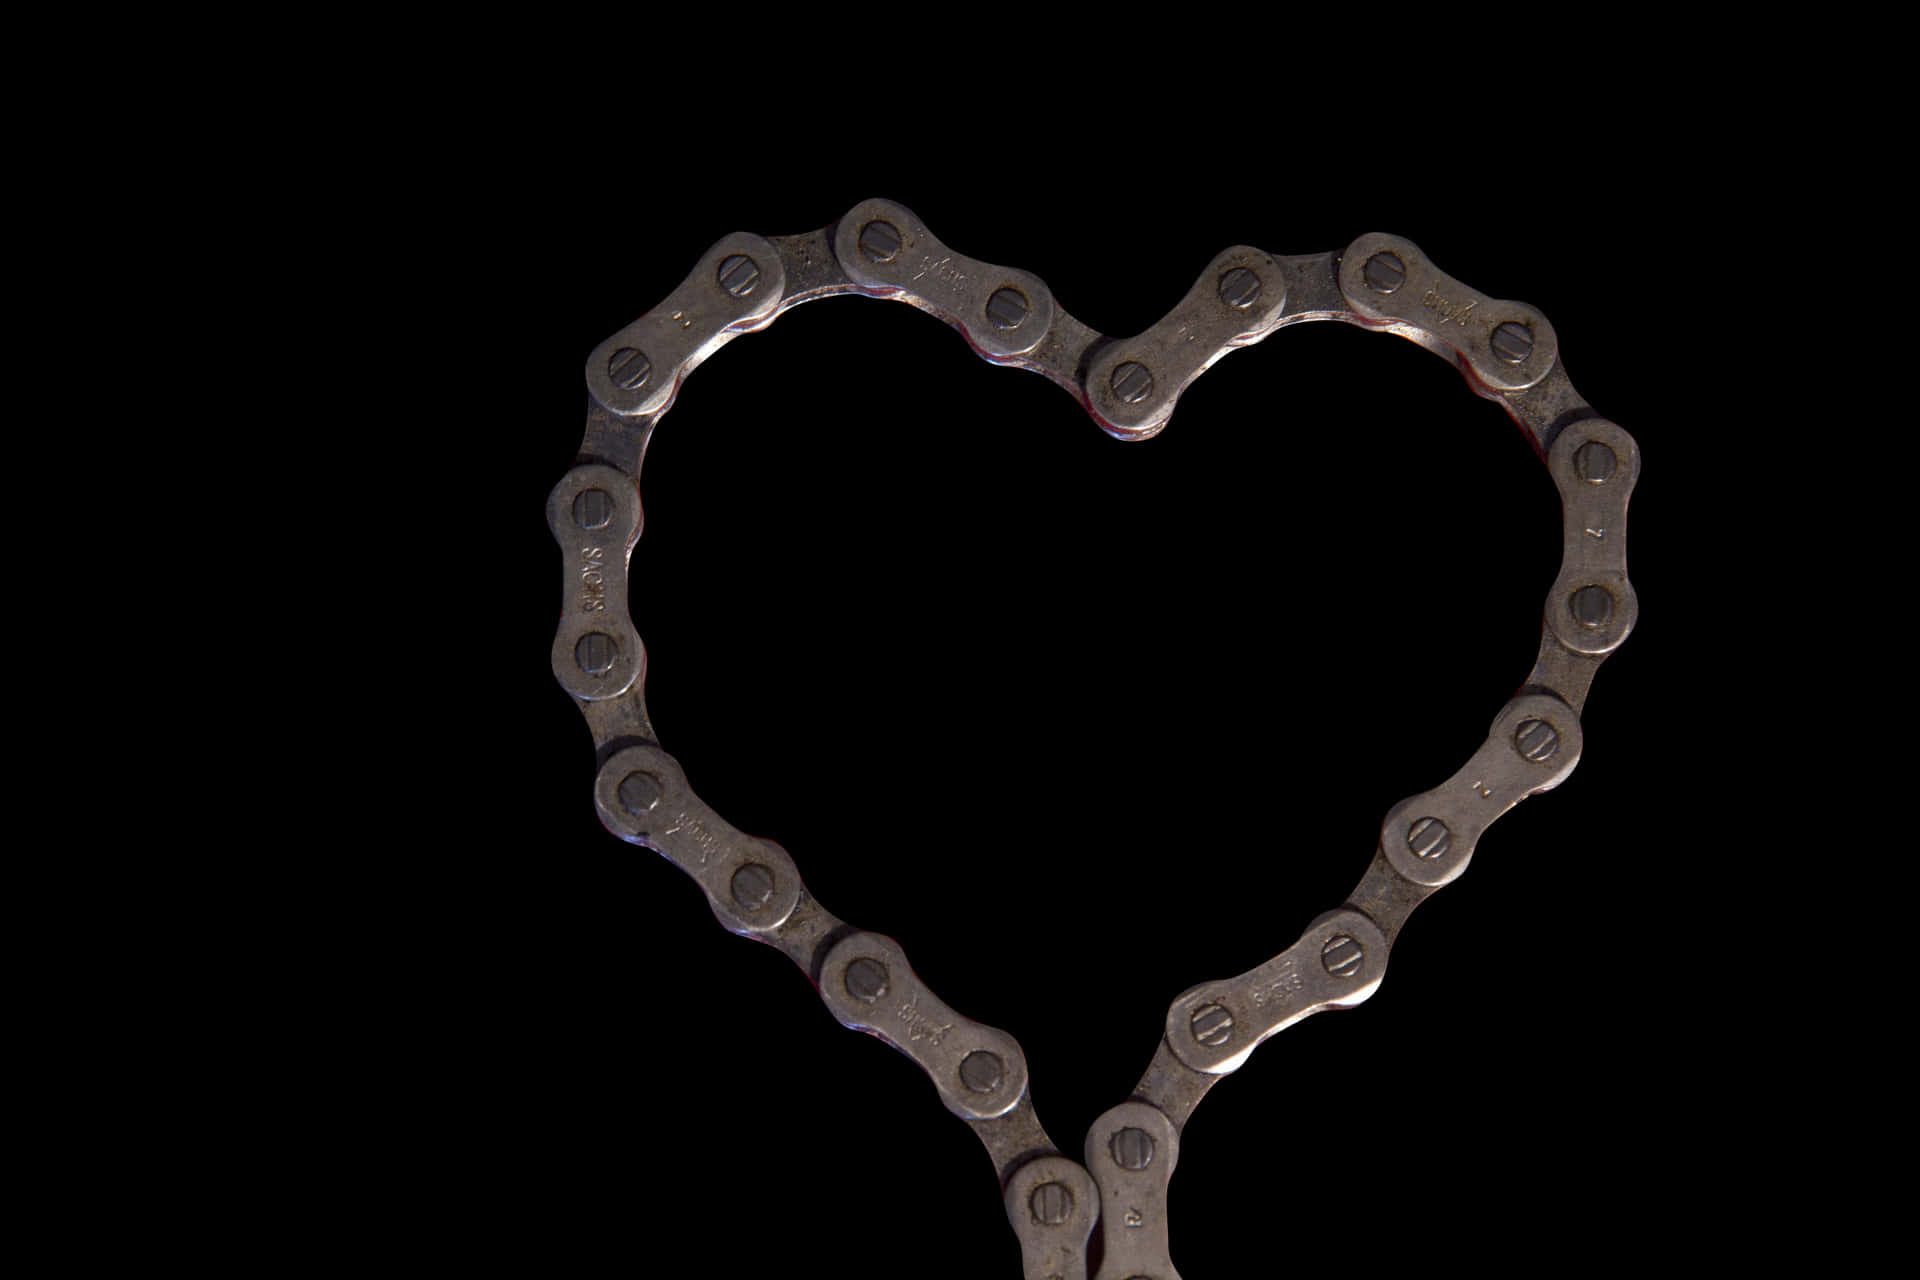 Bicycle Chain Heart Shaped Silhouette PNG